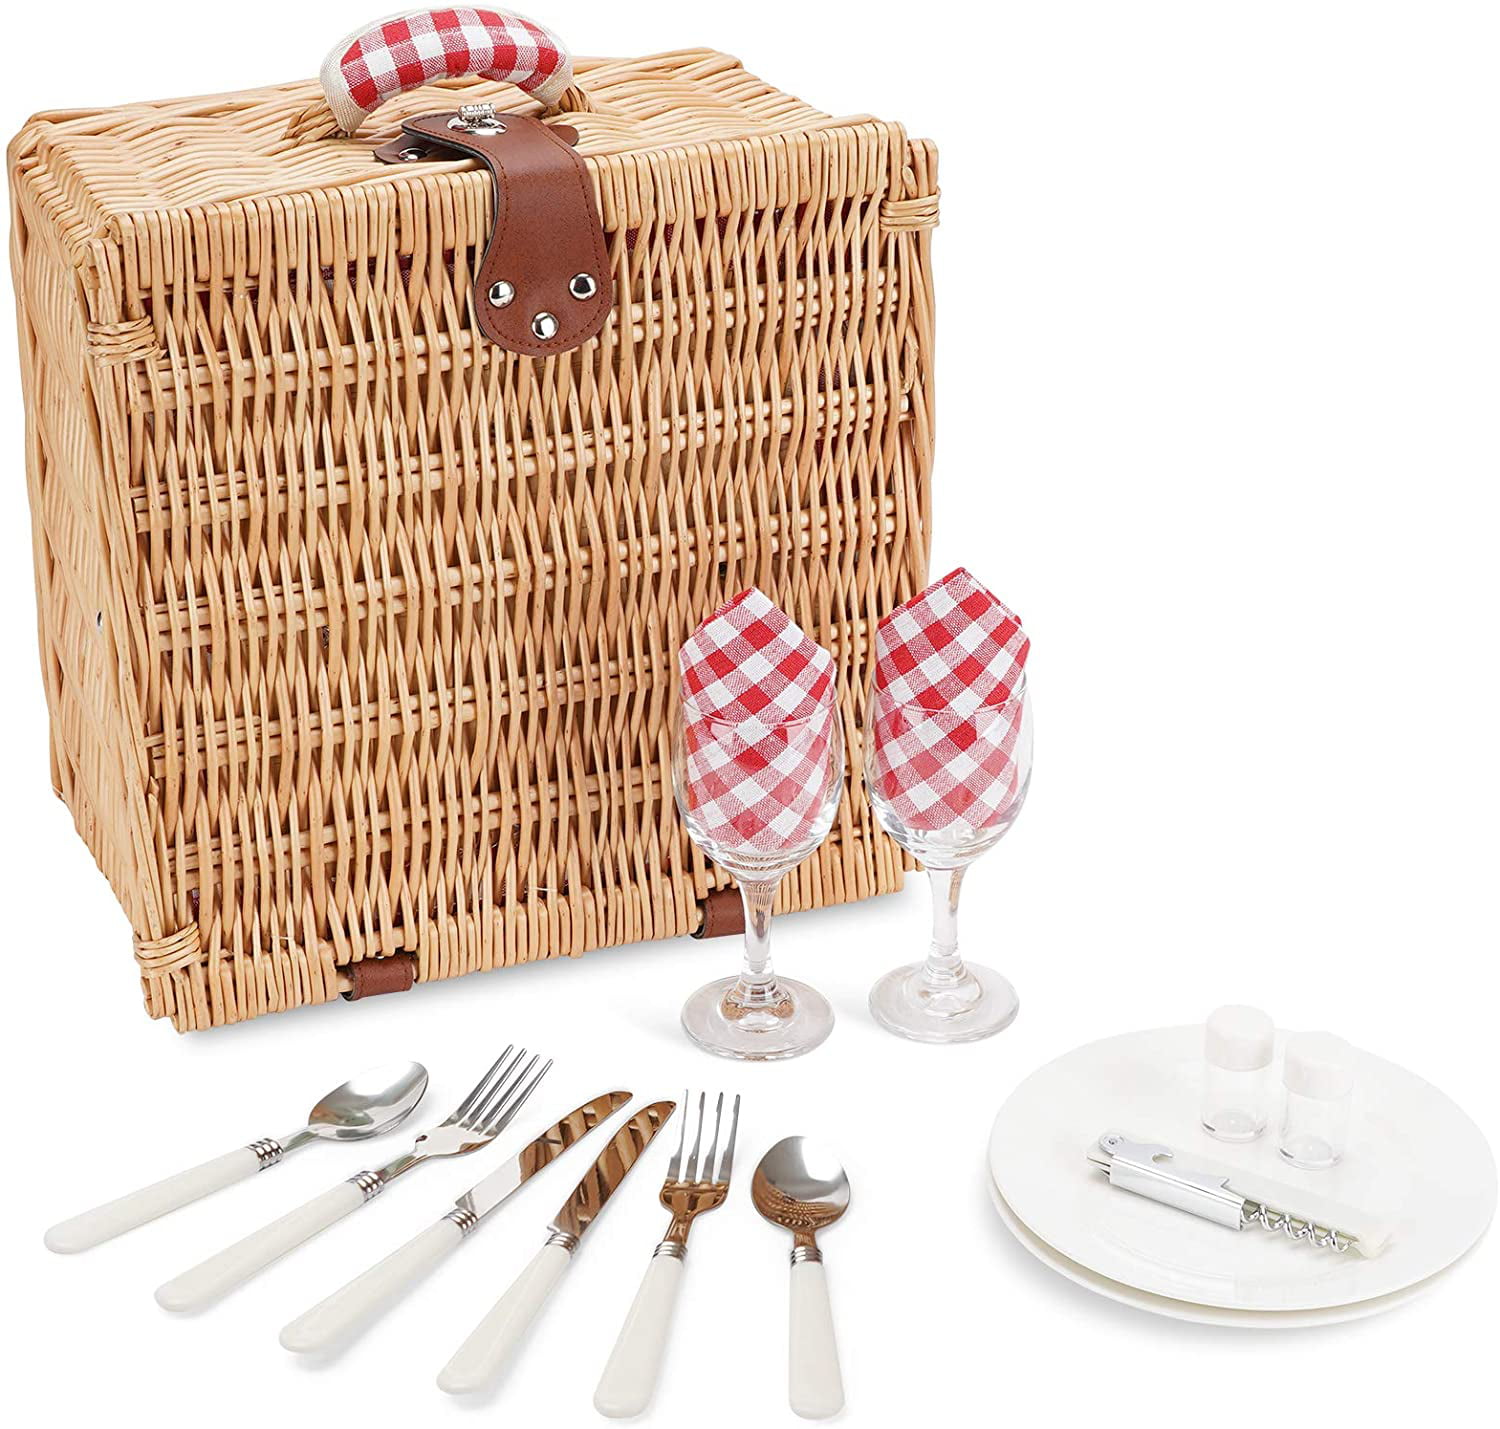 Reusable Plates Cups Utensils Red Plaid Wicker Picnic Basket Gift Set for 2 